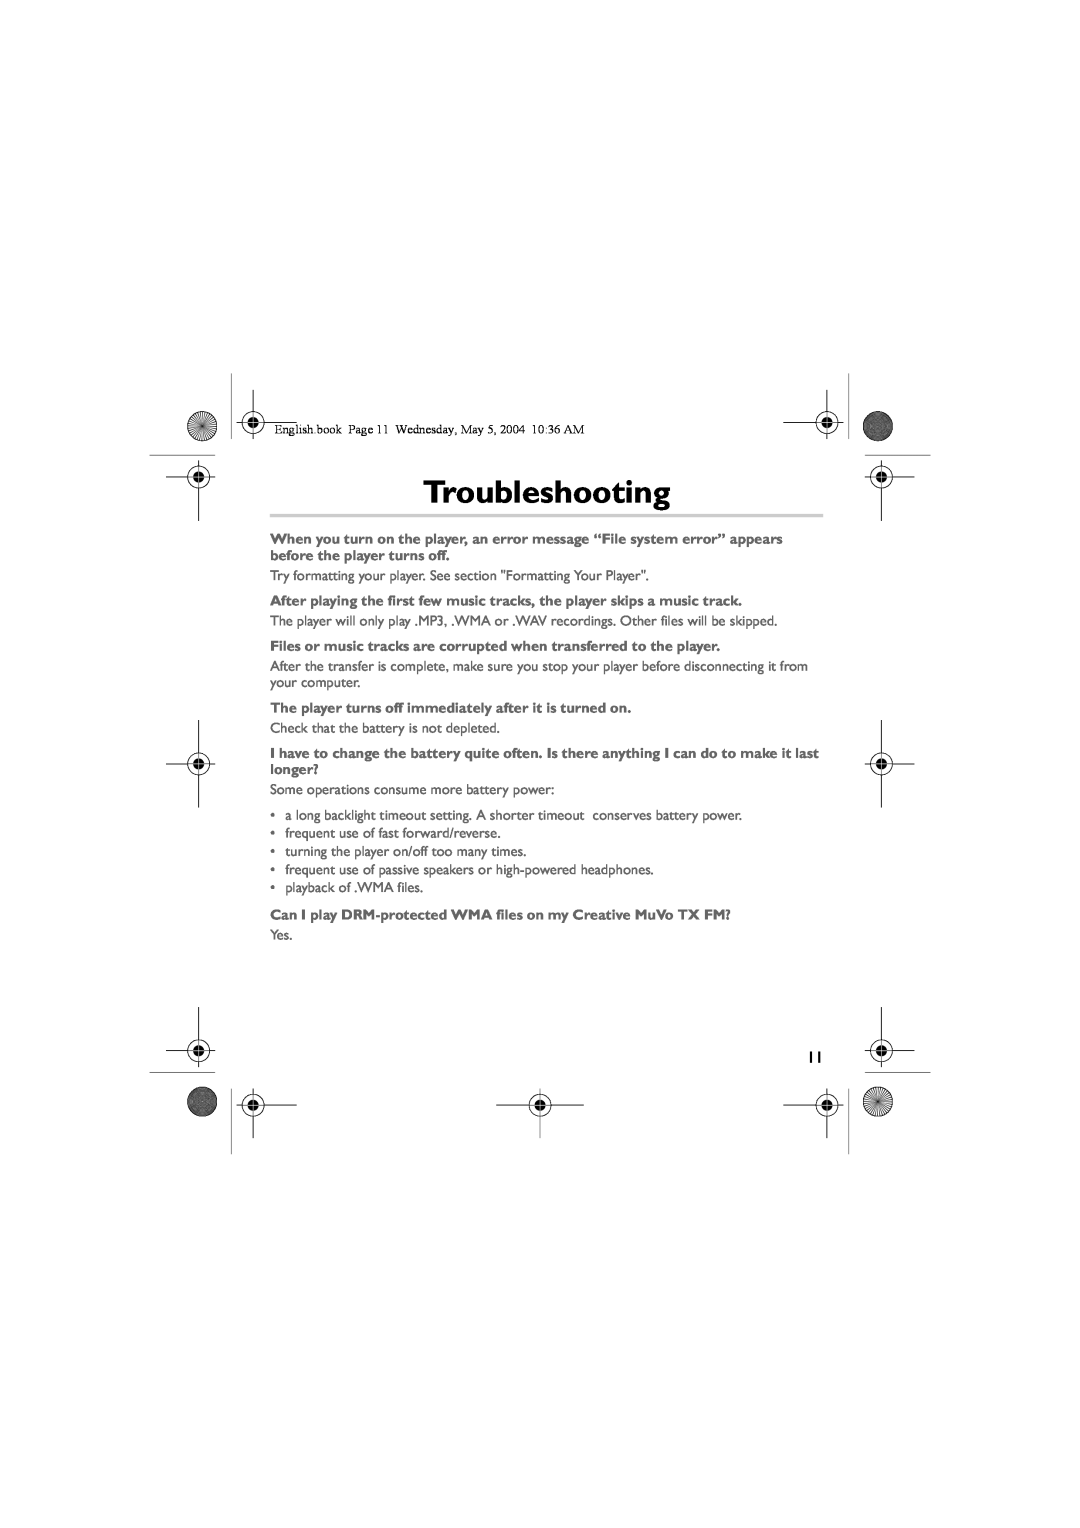 Musica CD Player manual Troubleshooting 